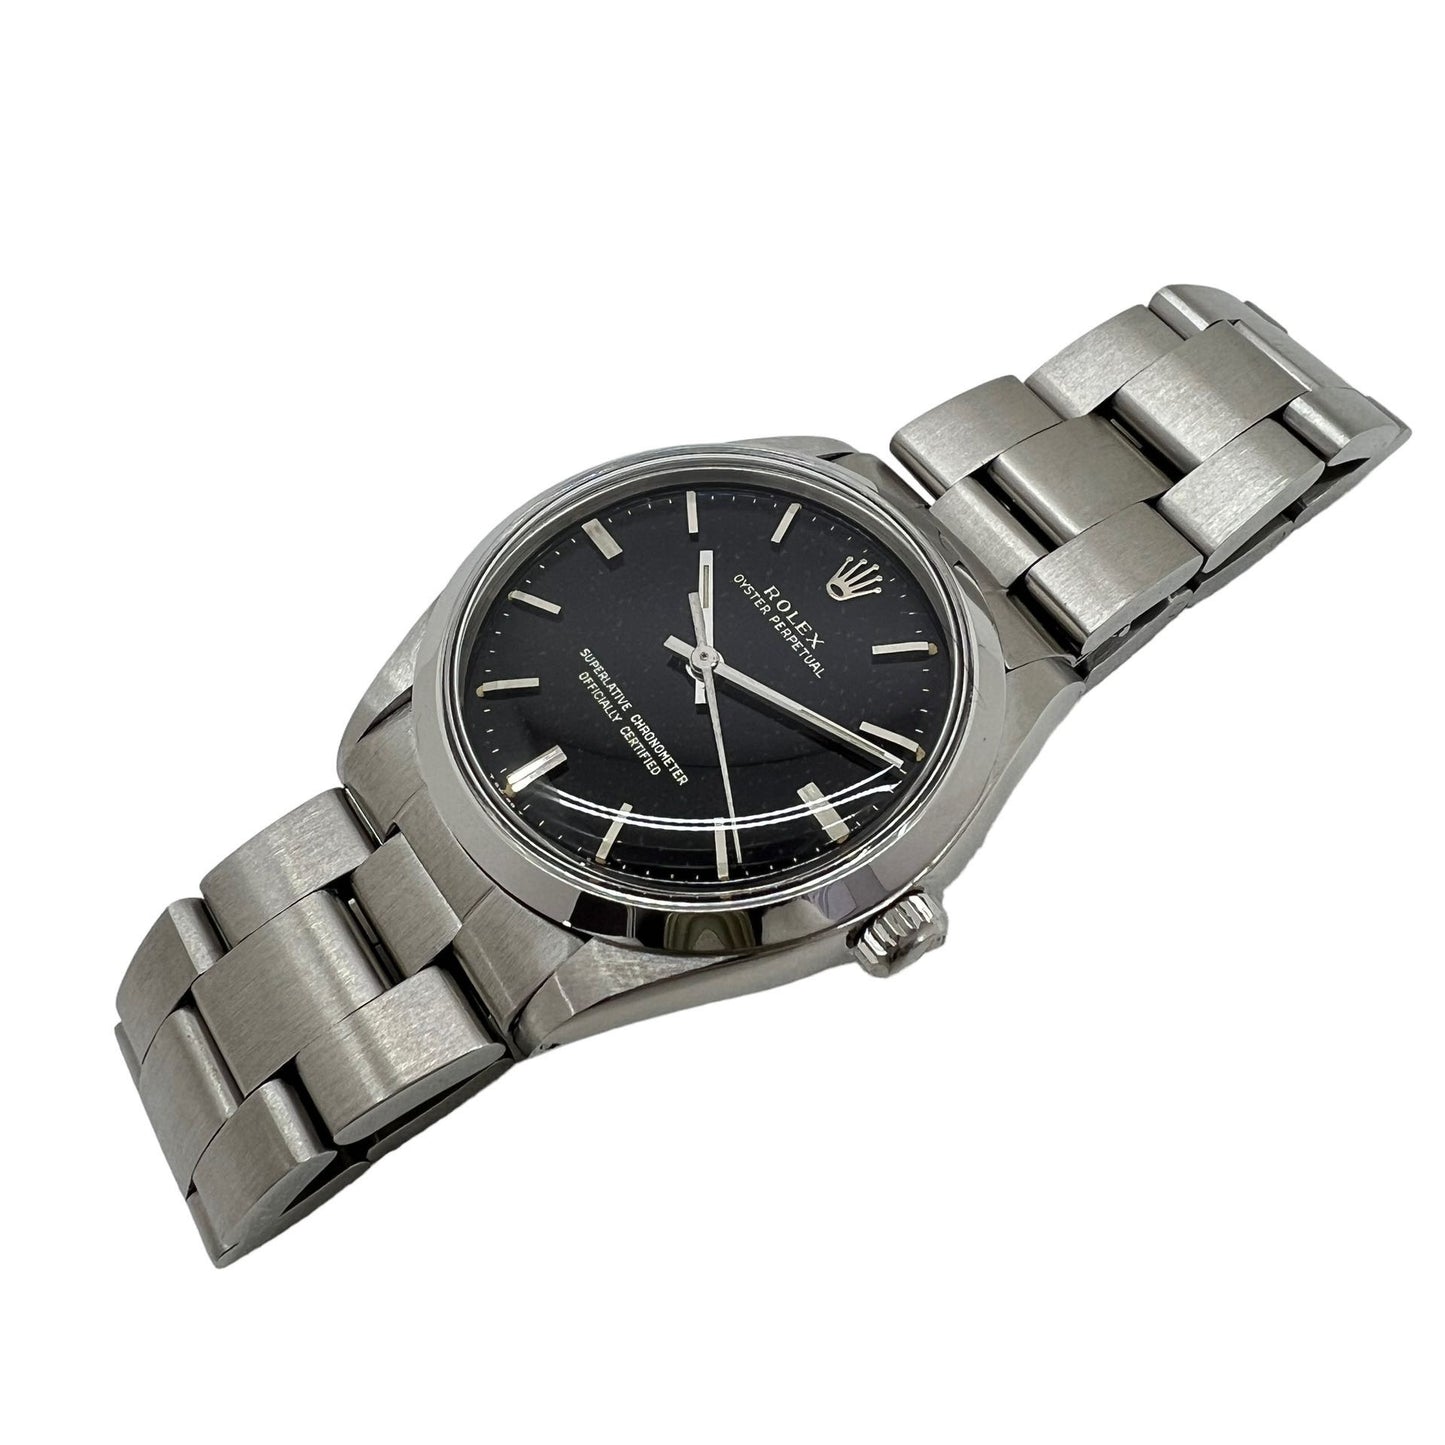 ROLEX OYSTER PERPETUAL REF. 1002 (1981)